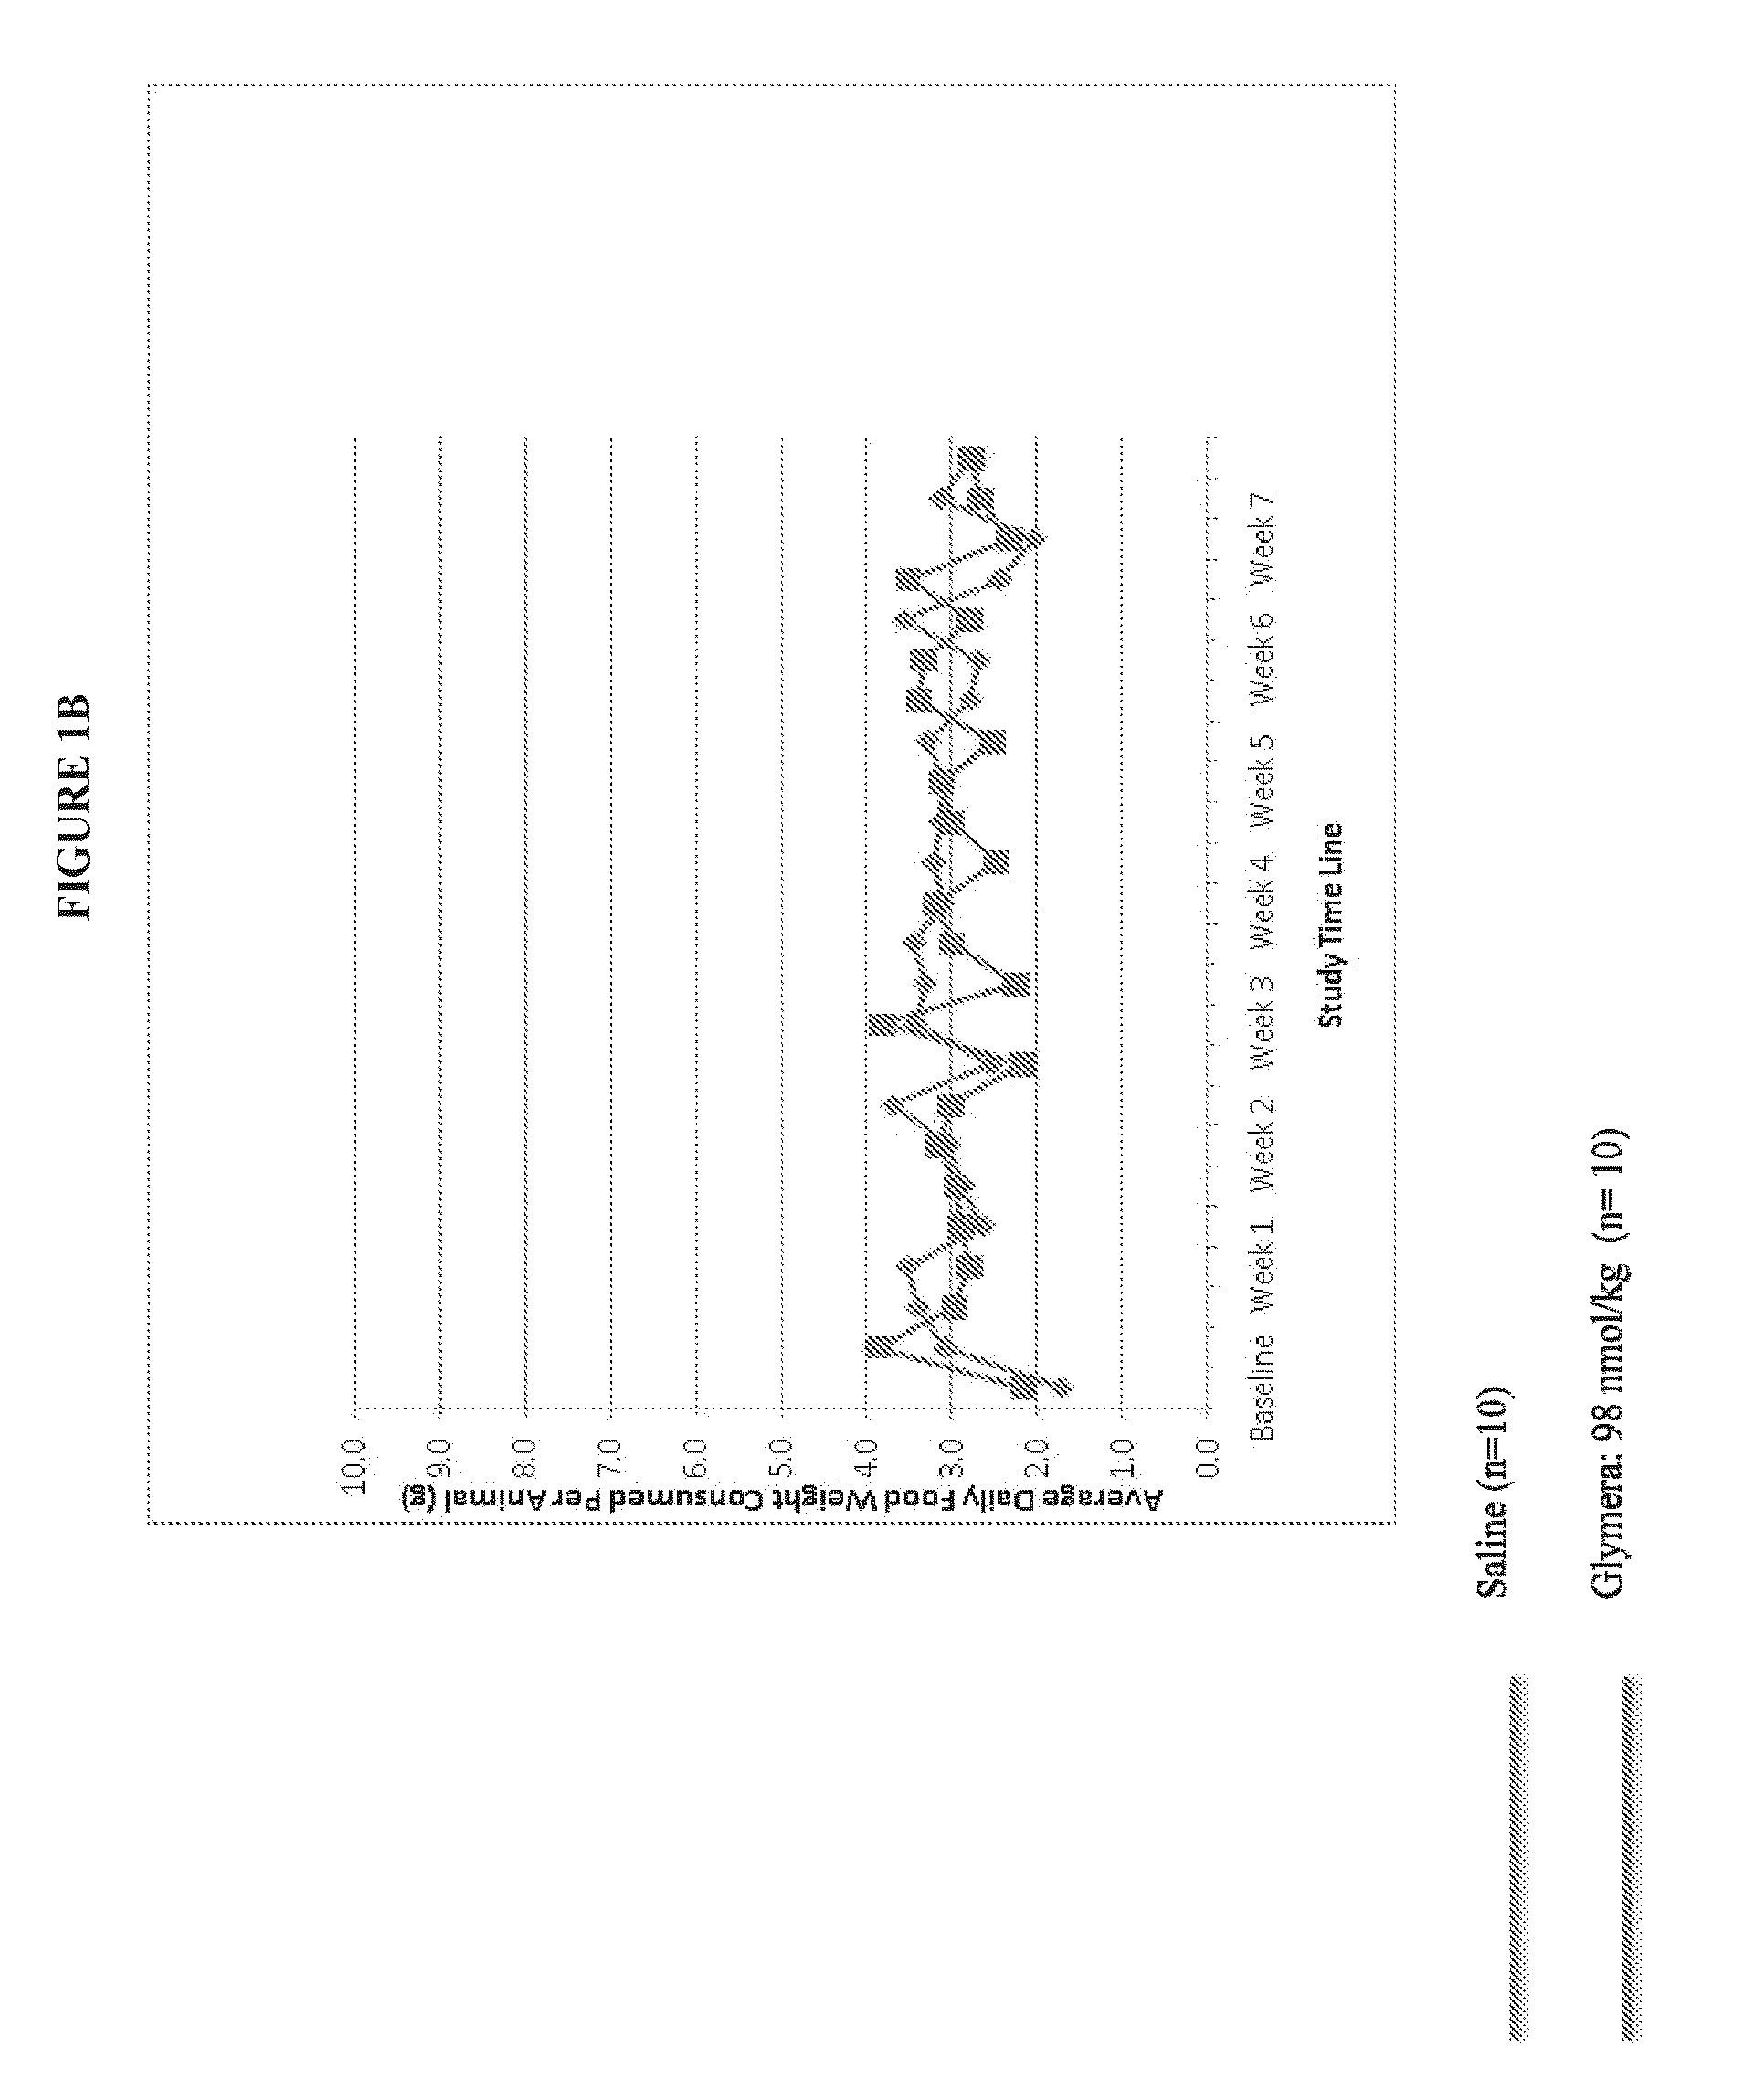 Methods and treatment with glp-1 receptor agonists